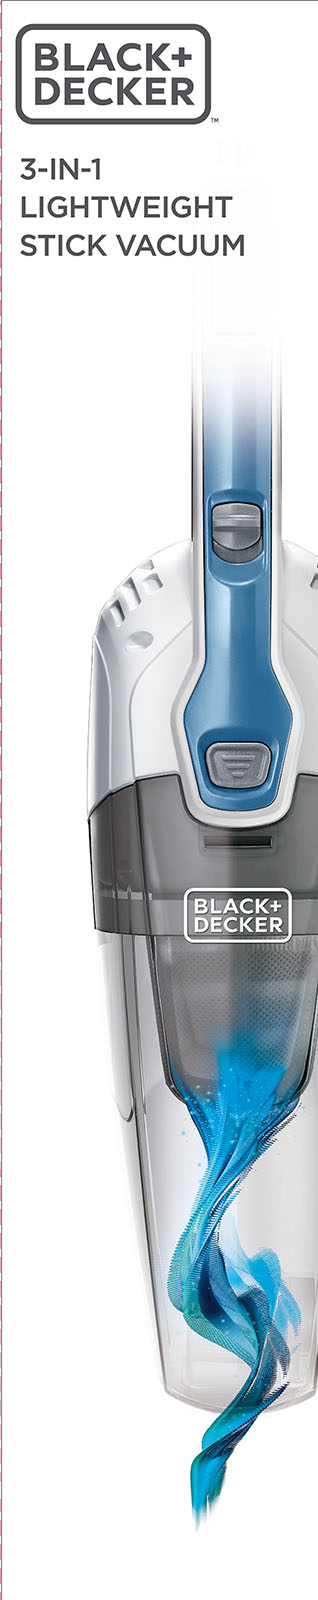 Black and Decker 3-in-1 Lightweight Corded Stick Vacuum - image 9 of 9